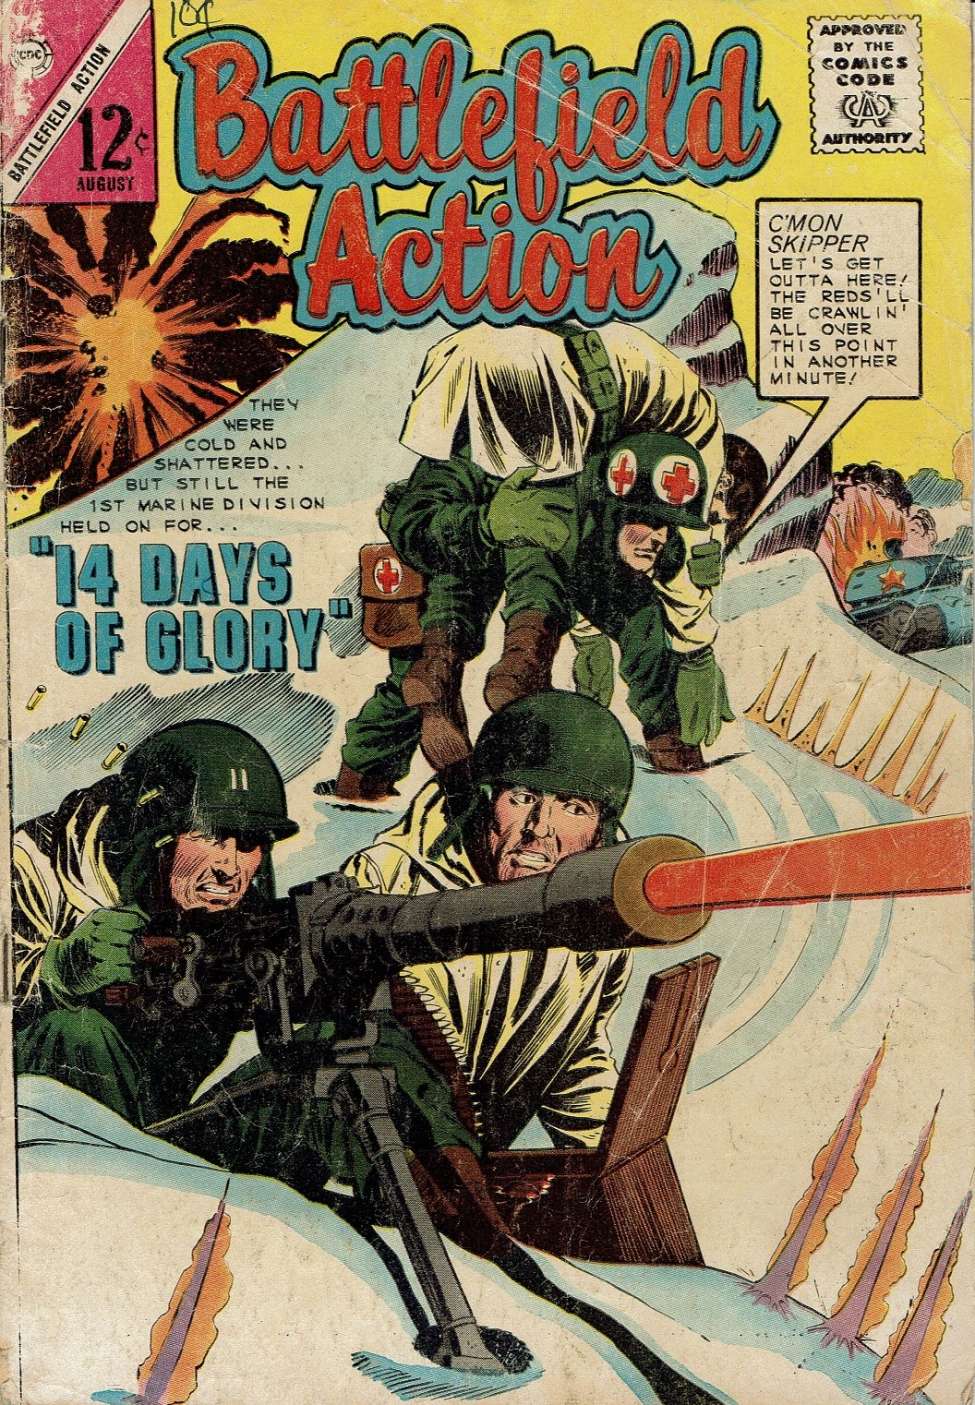 Book Cover For Battlefield Action 54